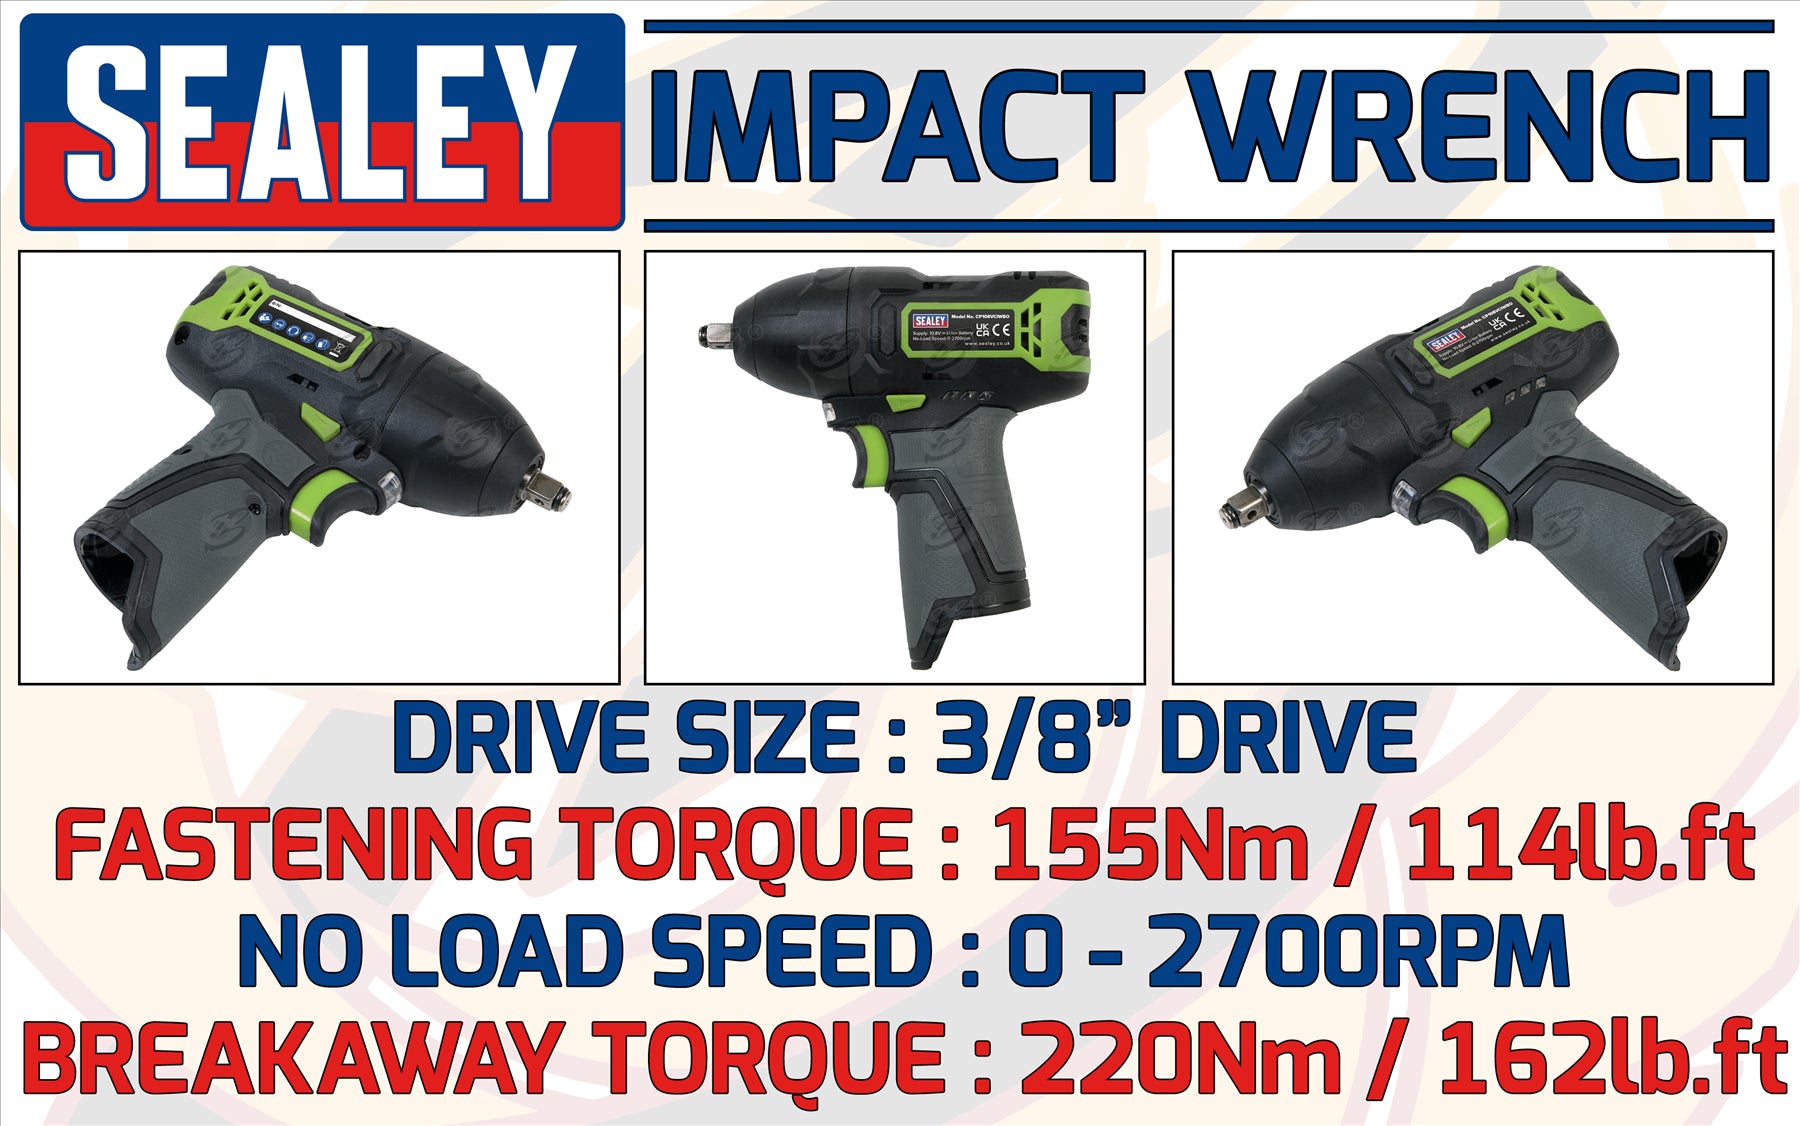 SEALEY 10.8V 3/8" DRIVE CORDLESS COMBO KIT ( DRILL - RATCHET WRENCH - IMPACT WRENCH - IMPACT DRIVER )